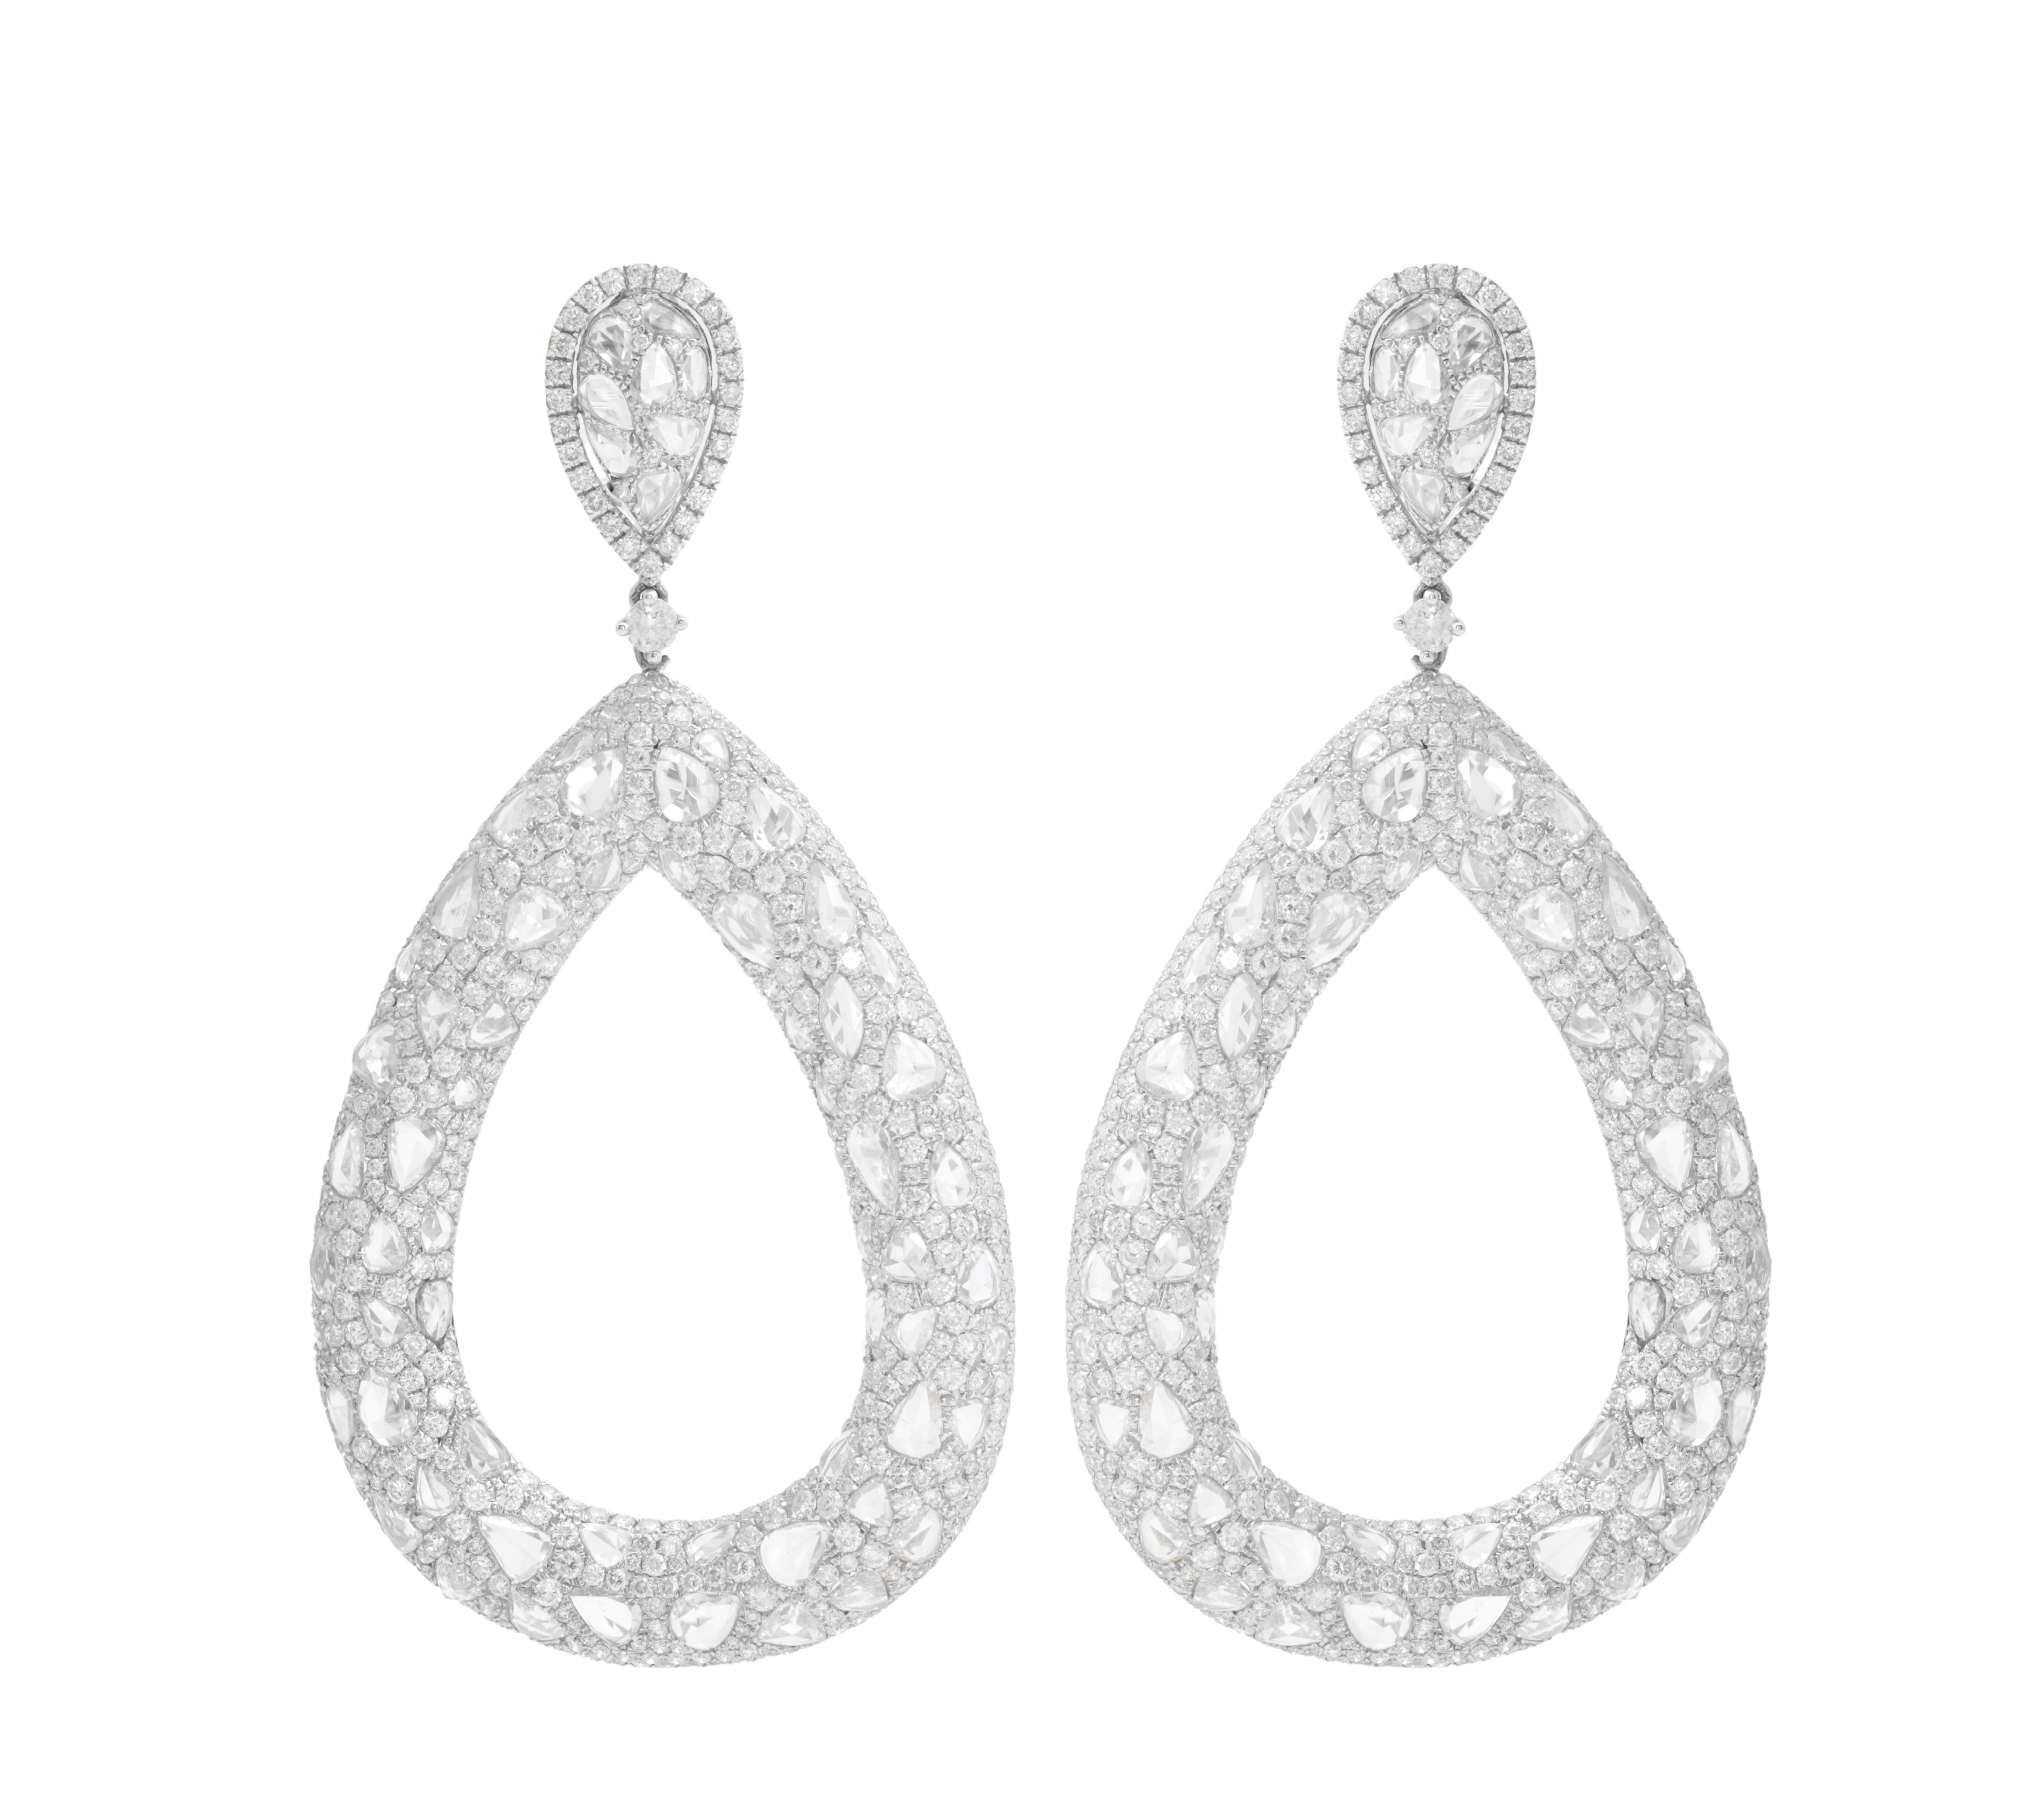 18 kt White Gold Diamond Earrings adorned with 24.84 cts tw of Diamonds.
Diana M. is a leading supplier of top-quality fine jewelry for over 35 years.
Diana M is one-stop shop for all your jewelry shopping, carrying line of diamond rings, earrings,